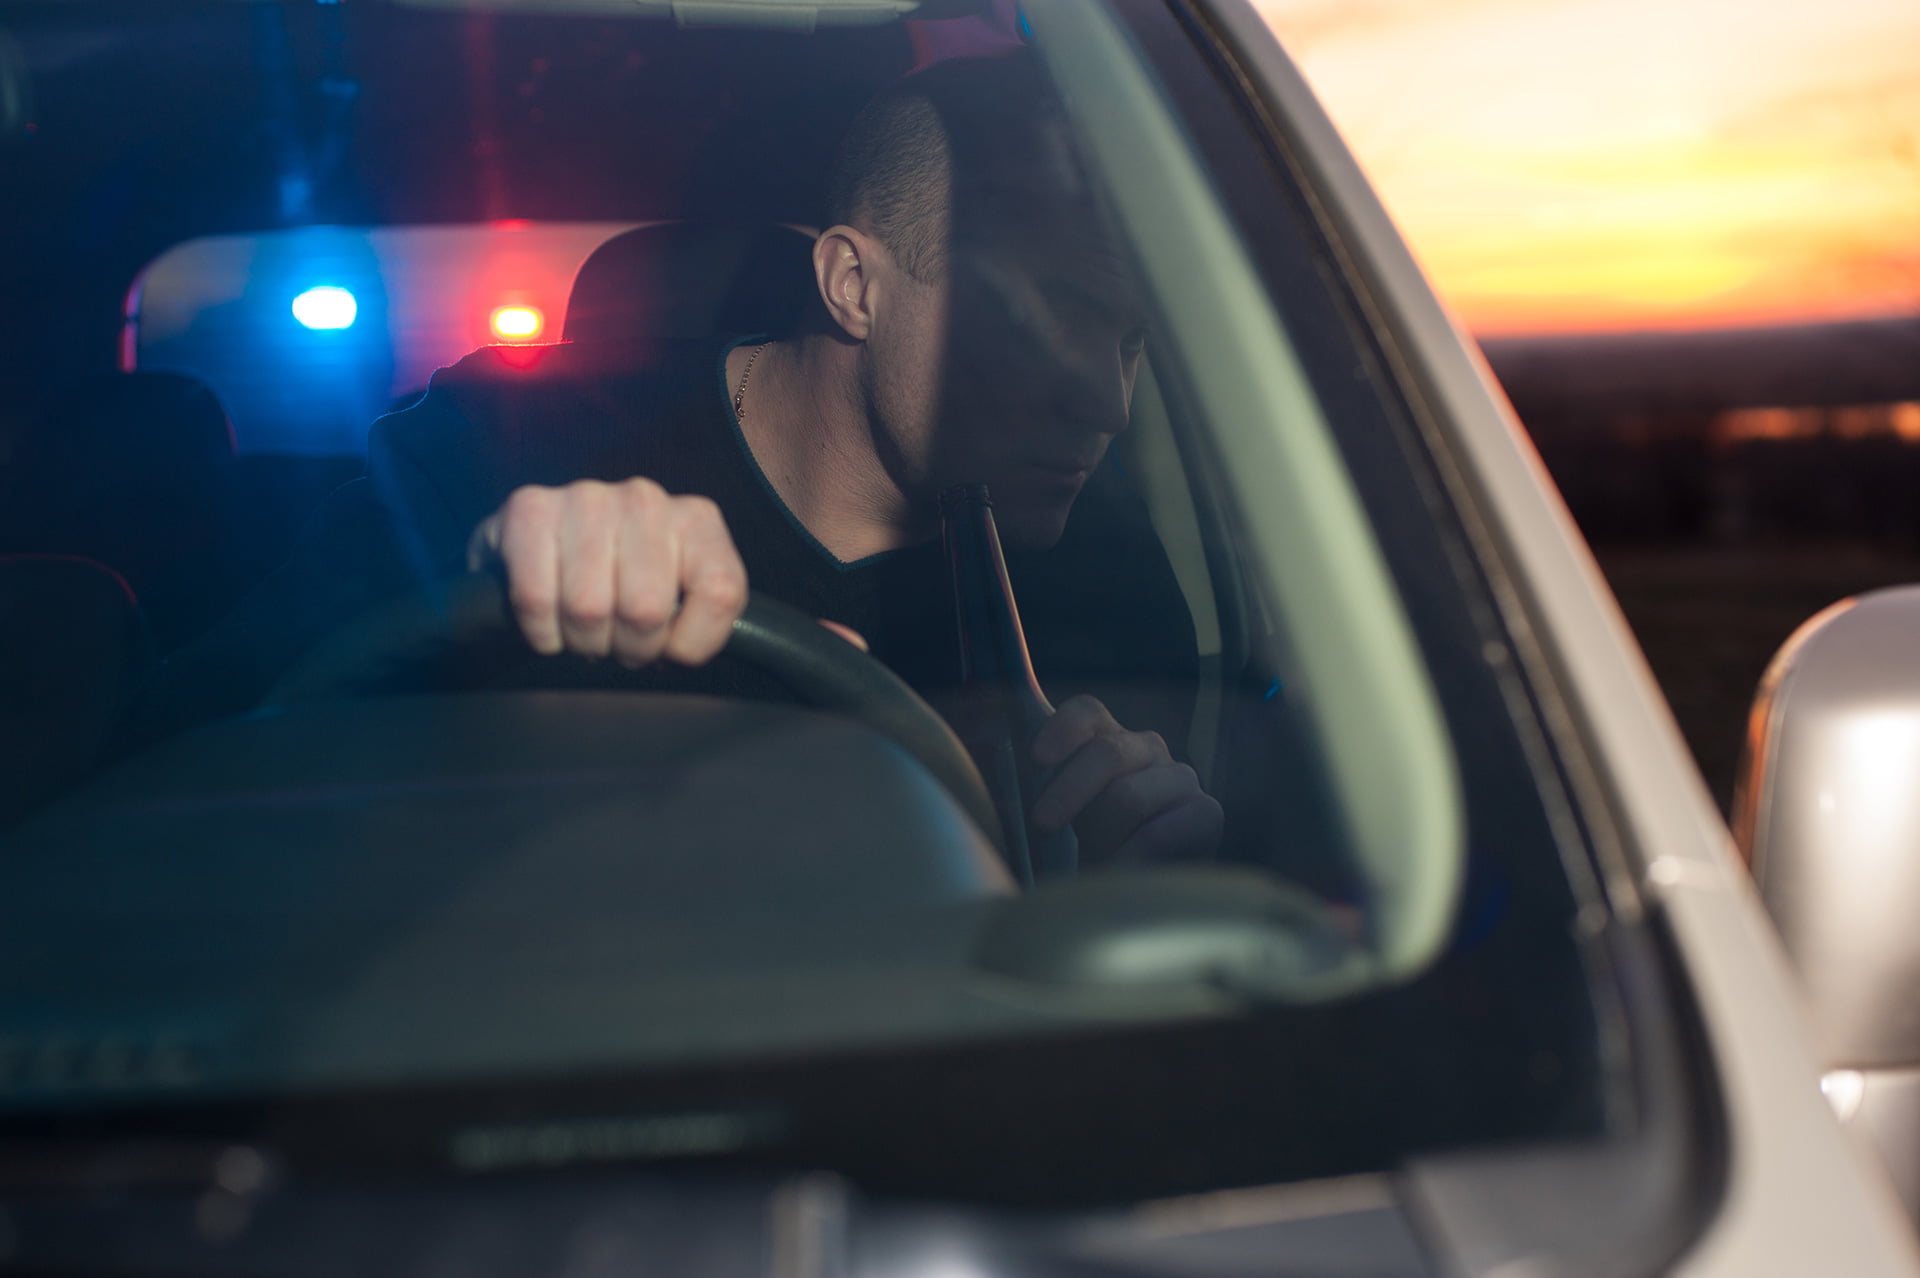 What to do during a DUI stop